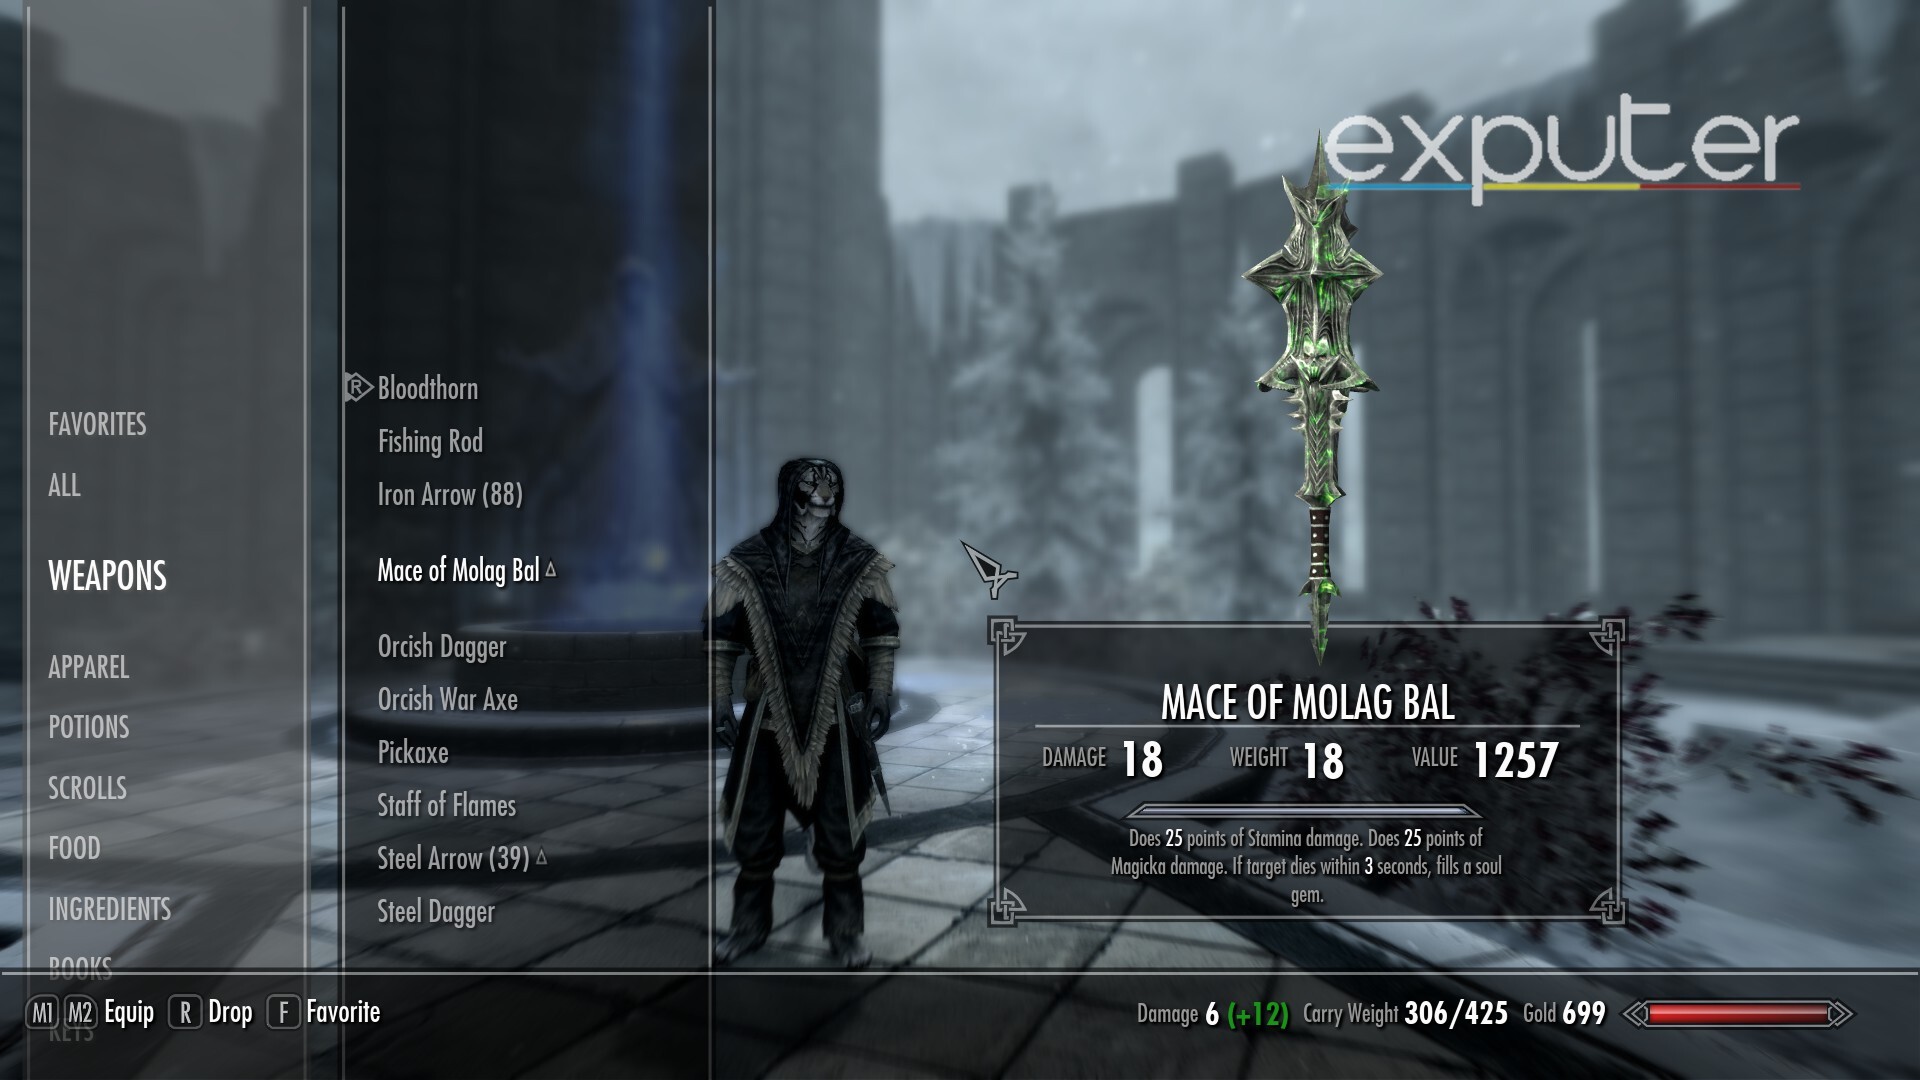 The Mace of the Molag Bal.